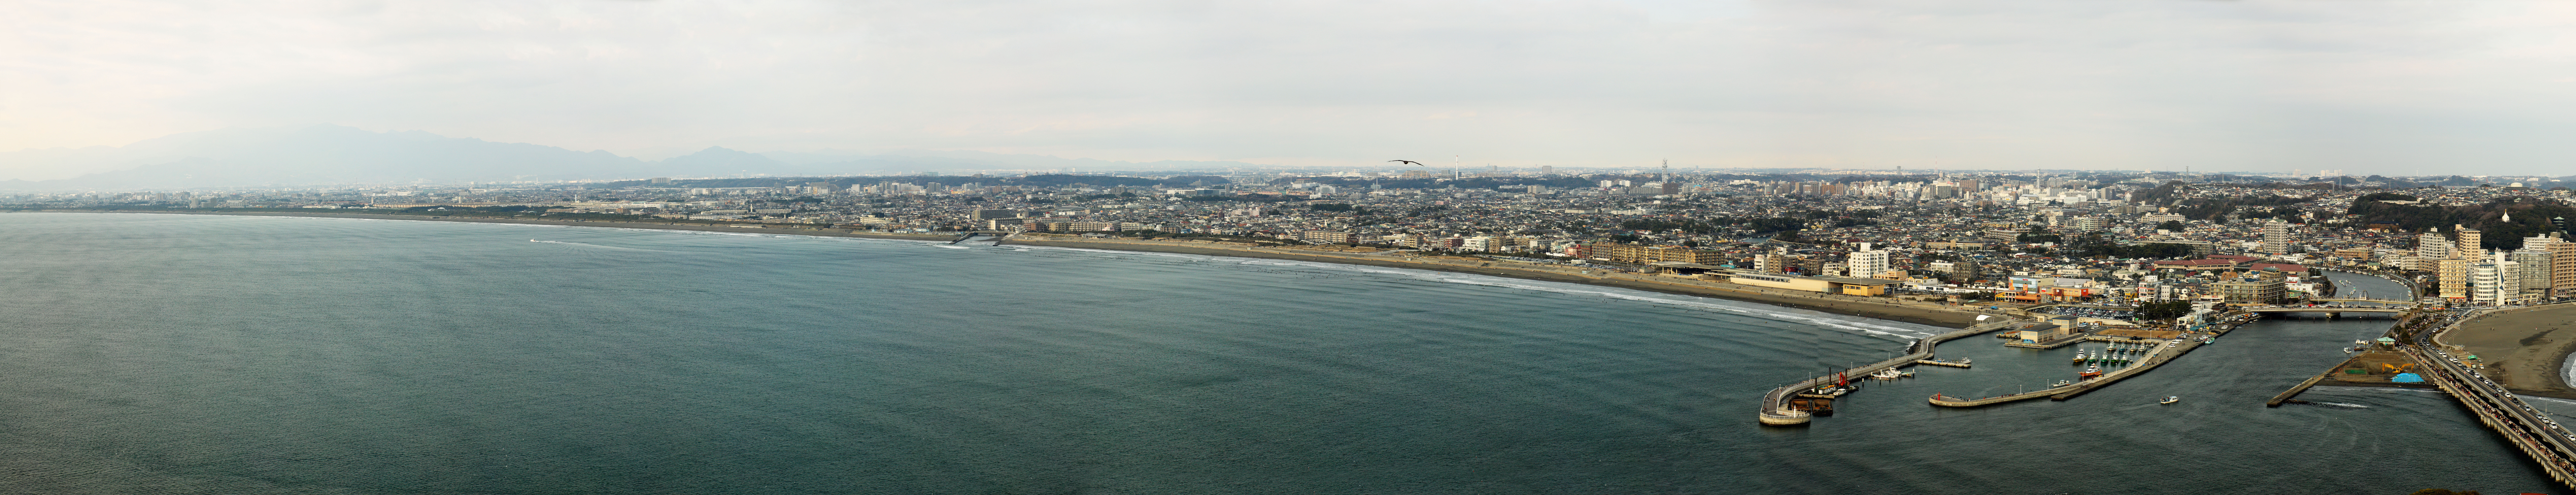 photo,material,free,landscape,picture,stock photo,Creative Commons,The scenery from Enoshima observatory, dike, wave, building, Miura Peninsula